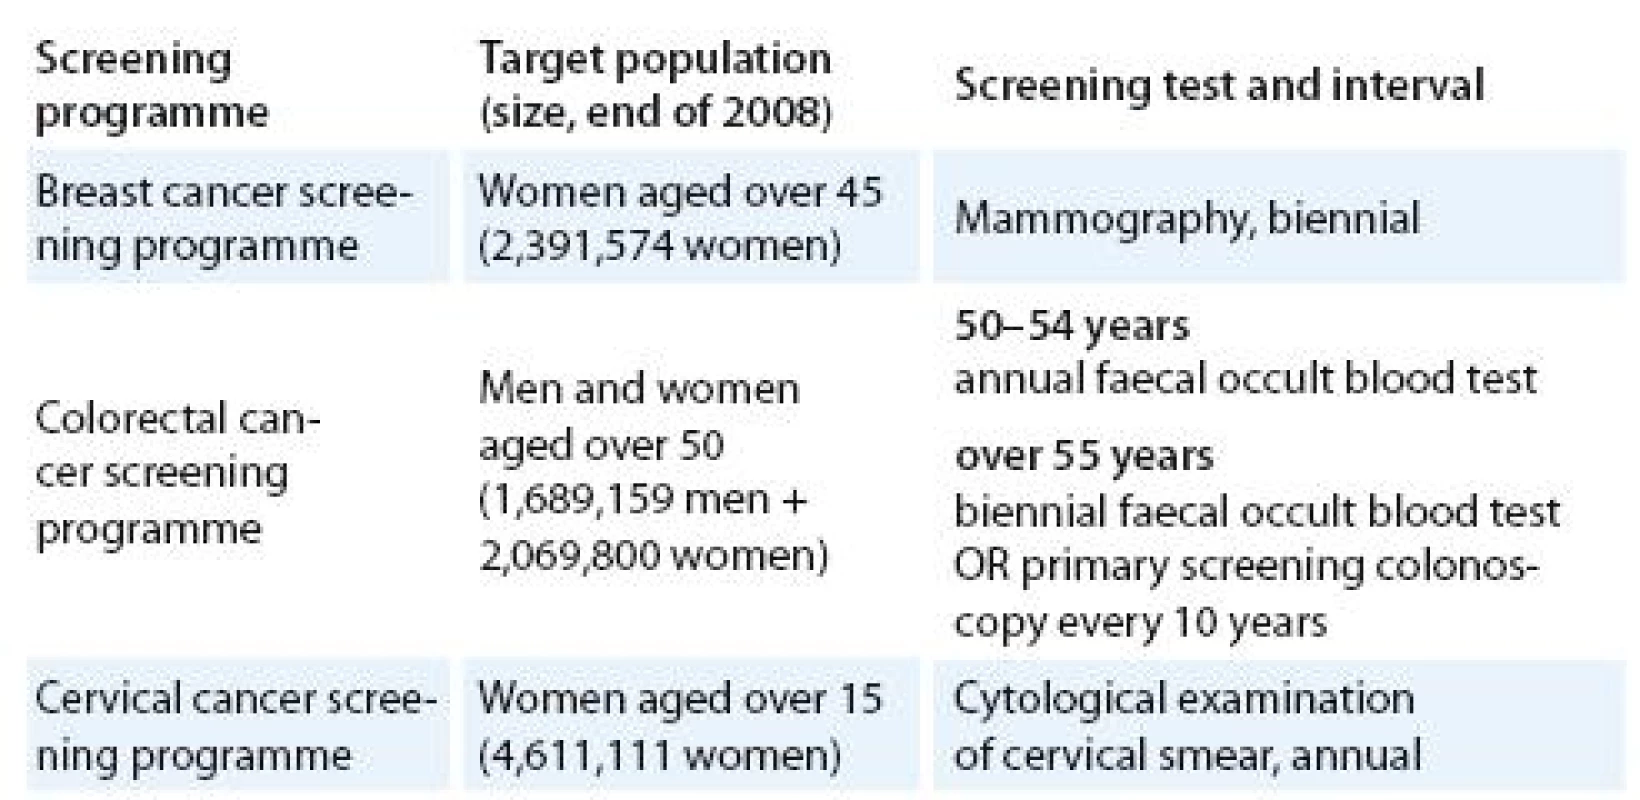 Screening tests and target populations in the Czech cancer screening programmes.